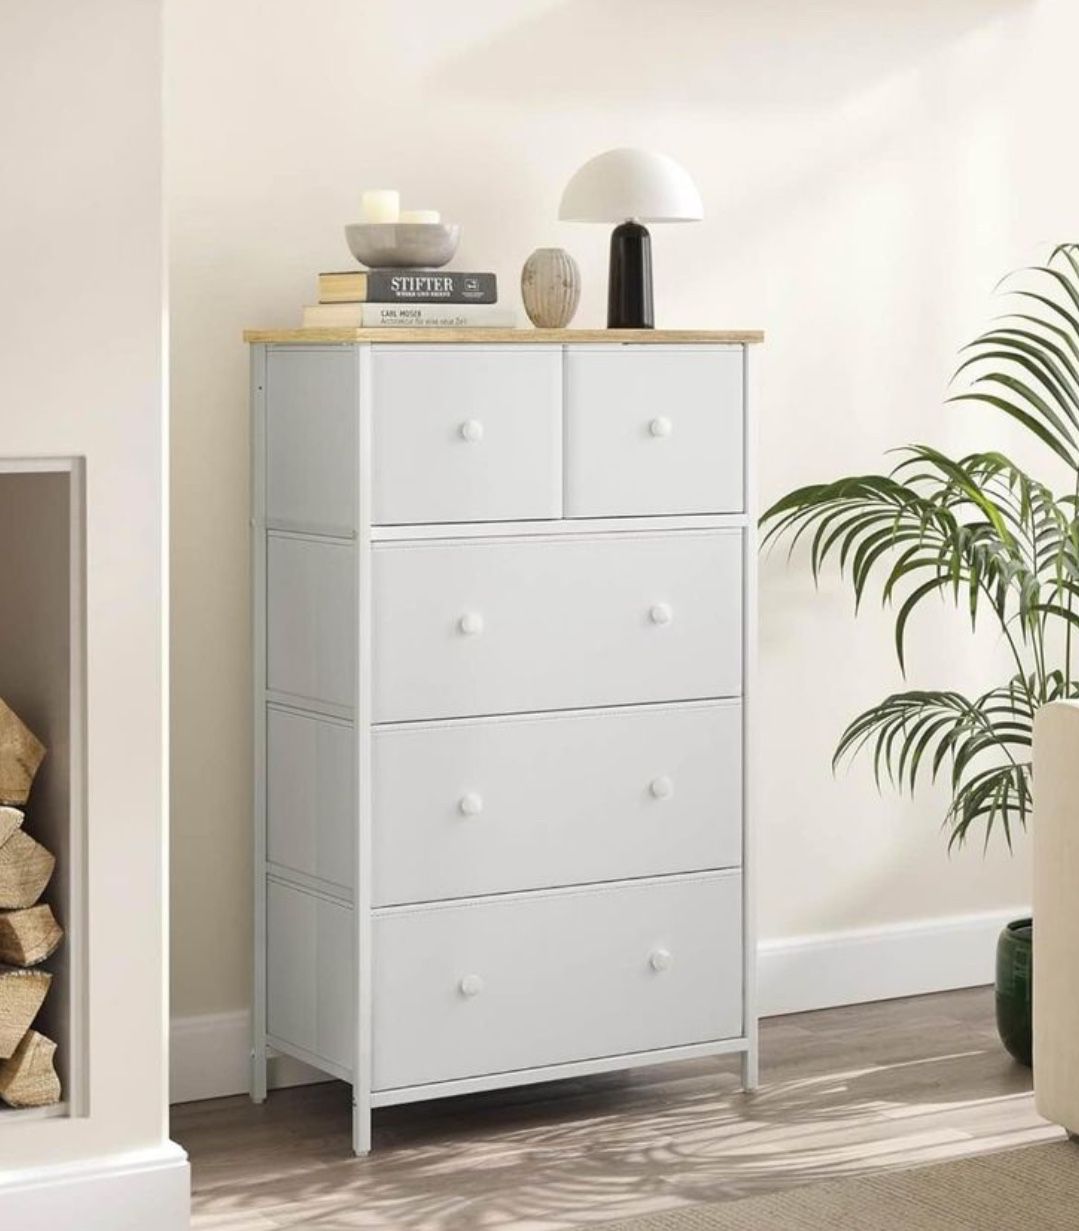 Storage Dresser Tower with 5 Fabric Drawers,